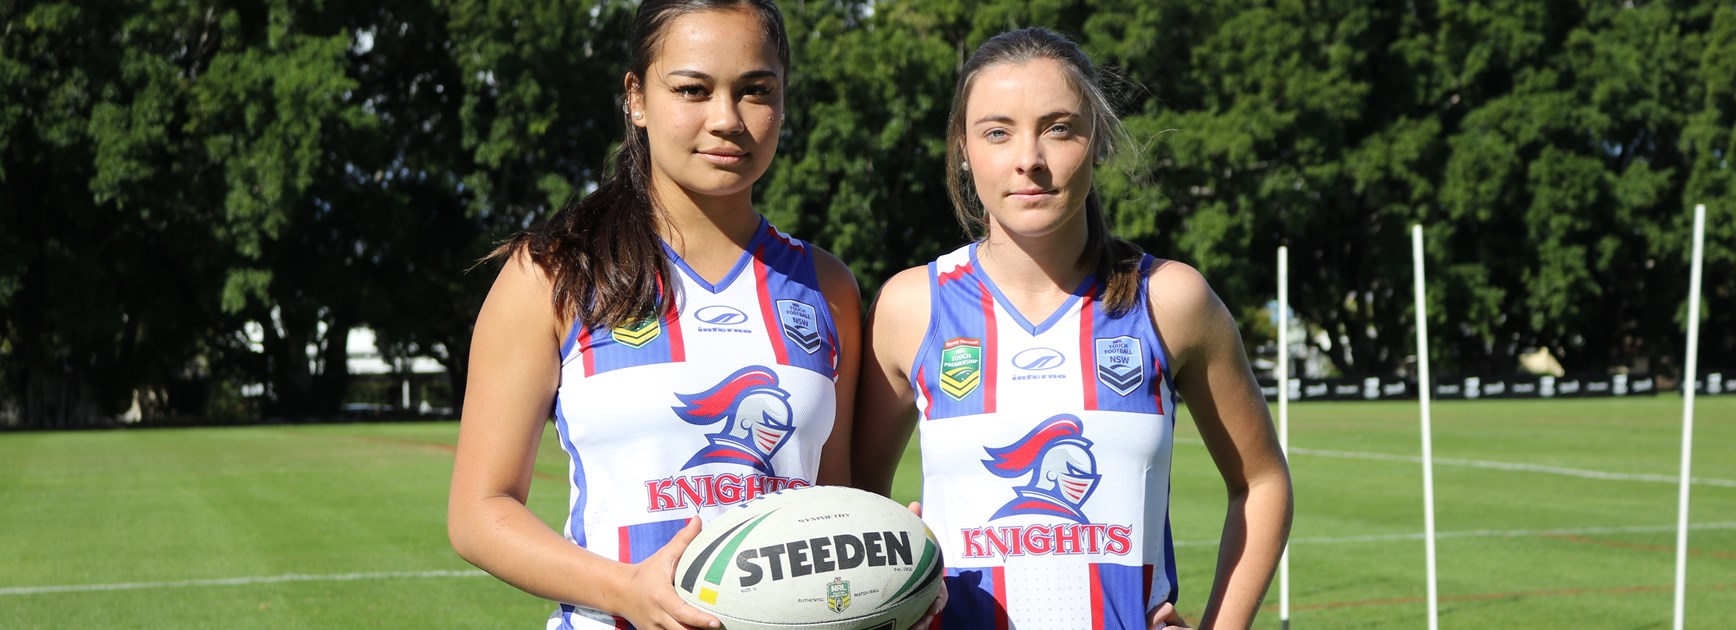 Knights touch highlights women in sport